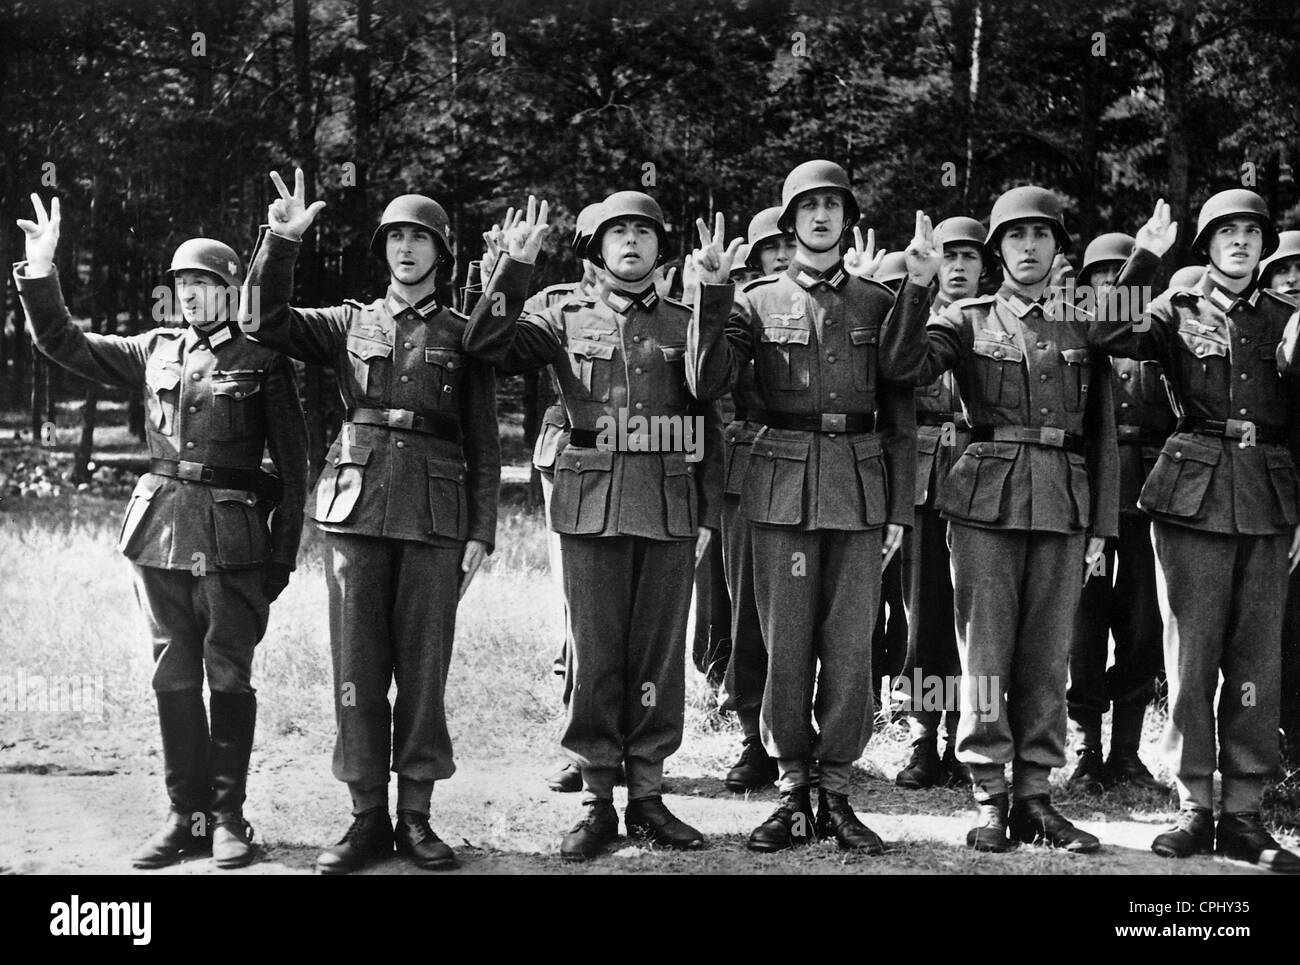 Walloon volunteers of the Waffen SS at the swearing-in, 1941 Stock Photo